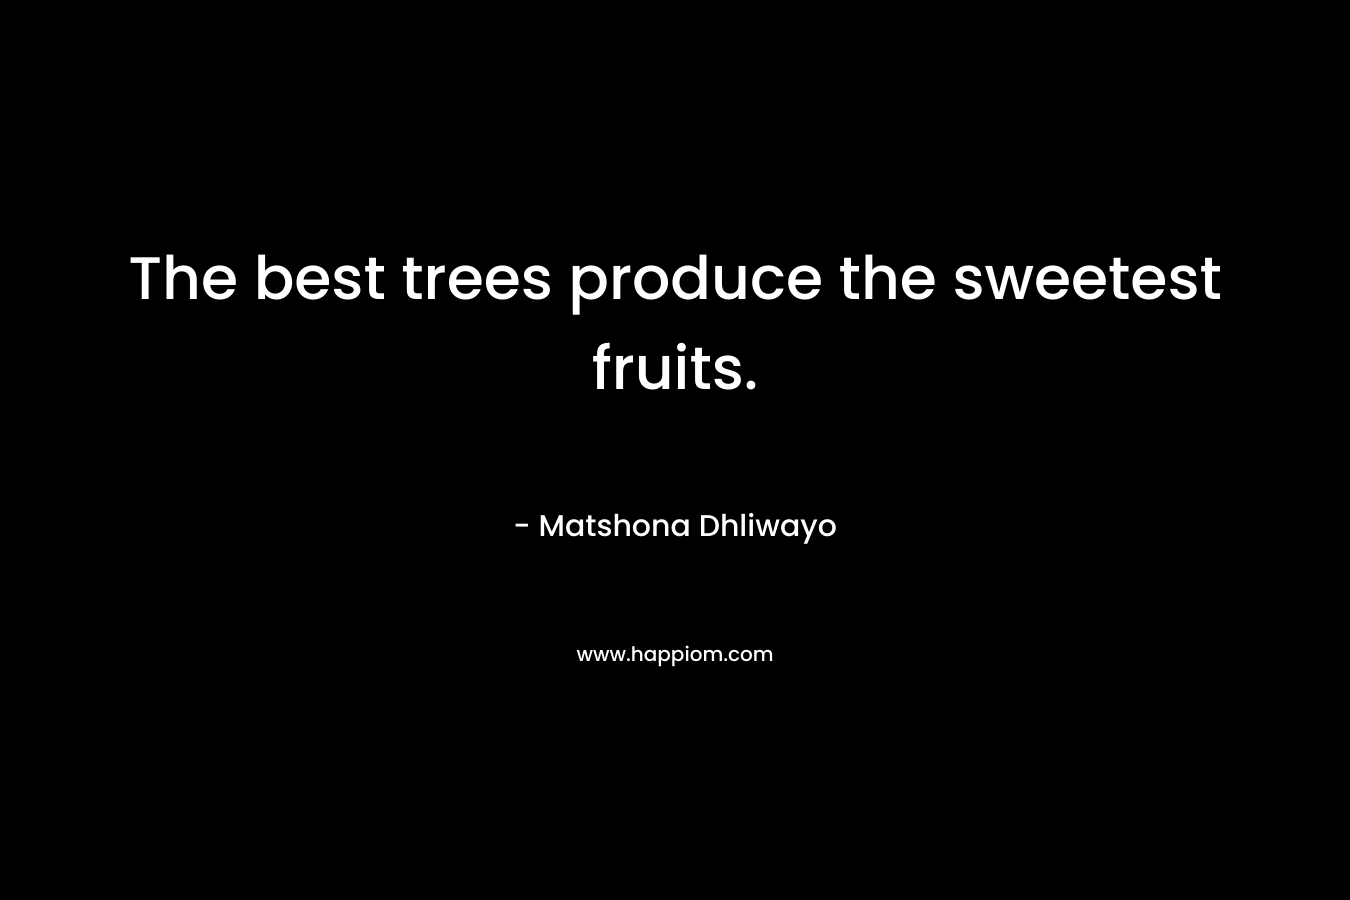 The best trees produce the sweetest fruits.